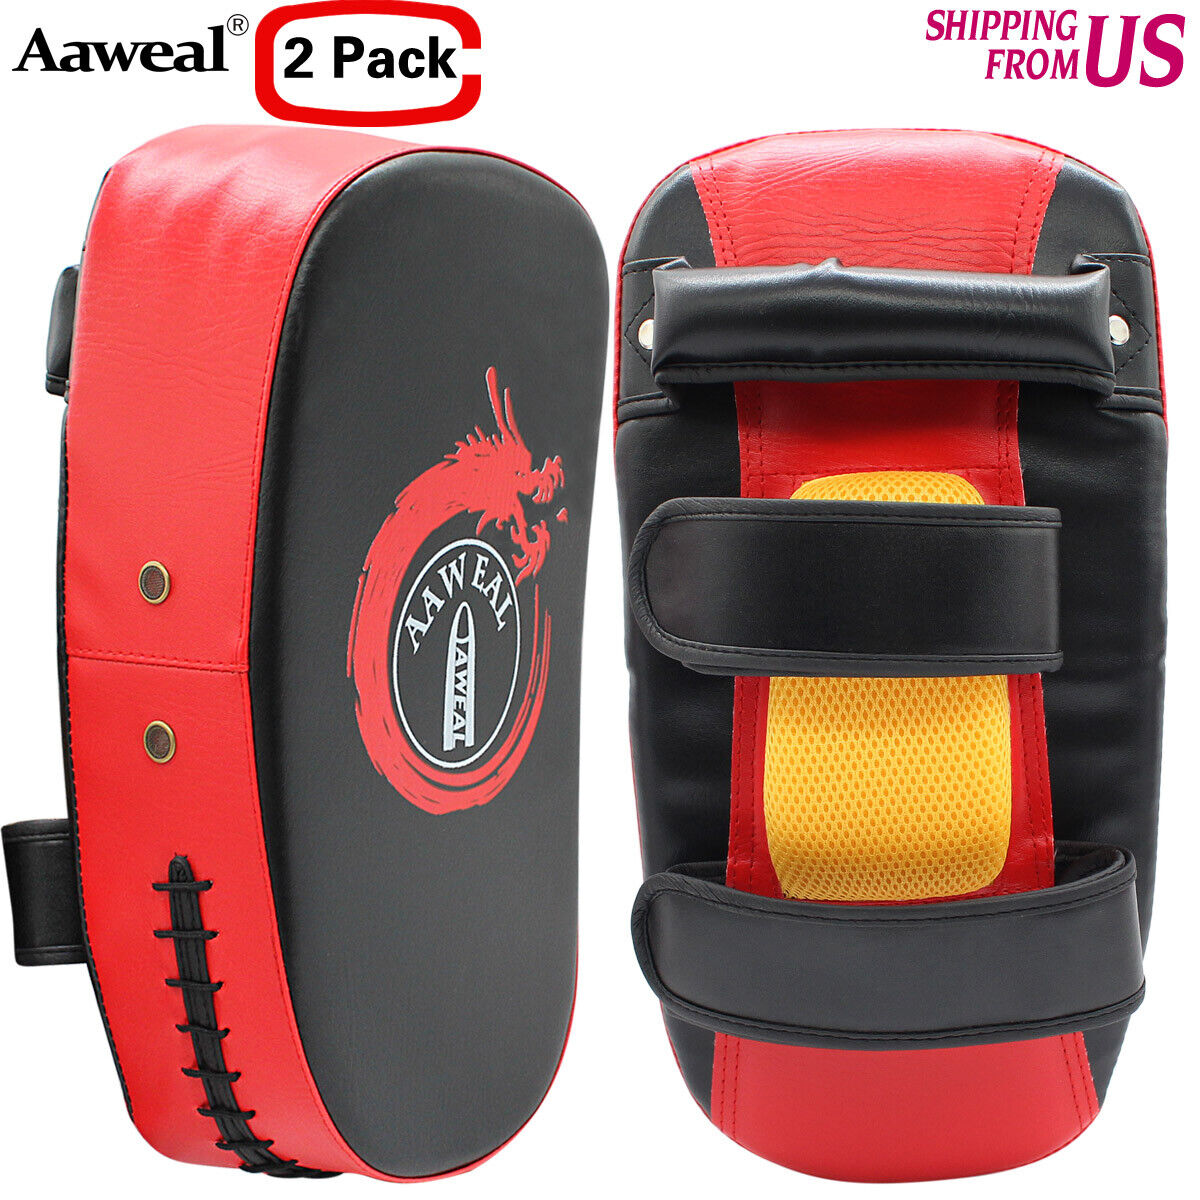 2pcs Boxing Kick Shield Strike Curved Arm Pad MMA Focus Muay Thai Punch Bag  Aaweal Does Not Apply